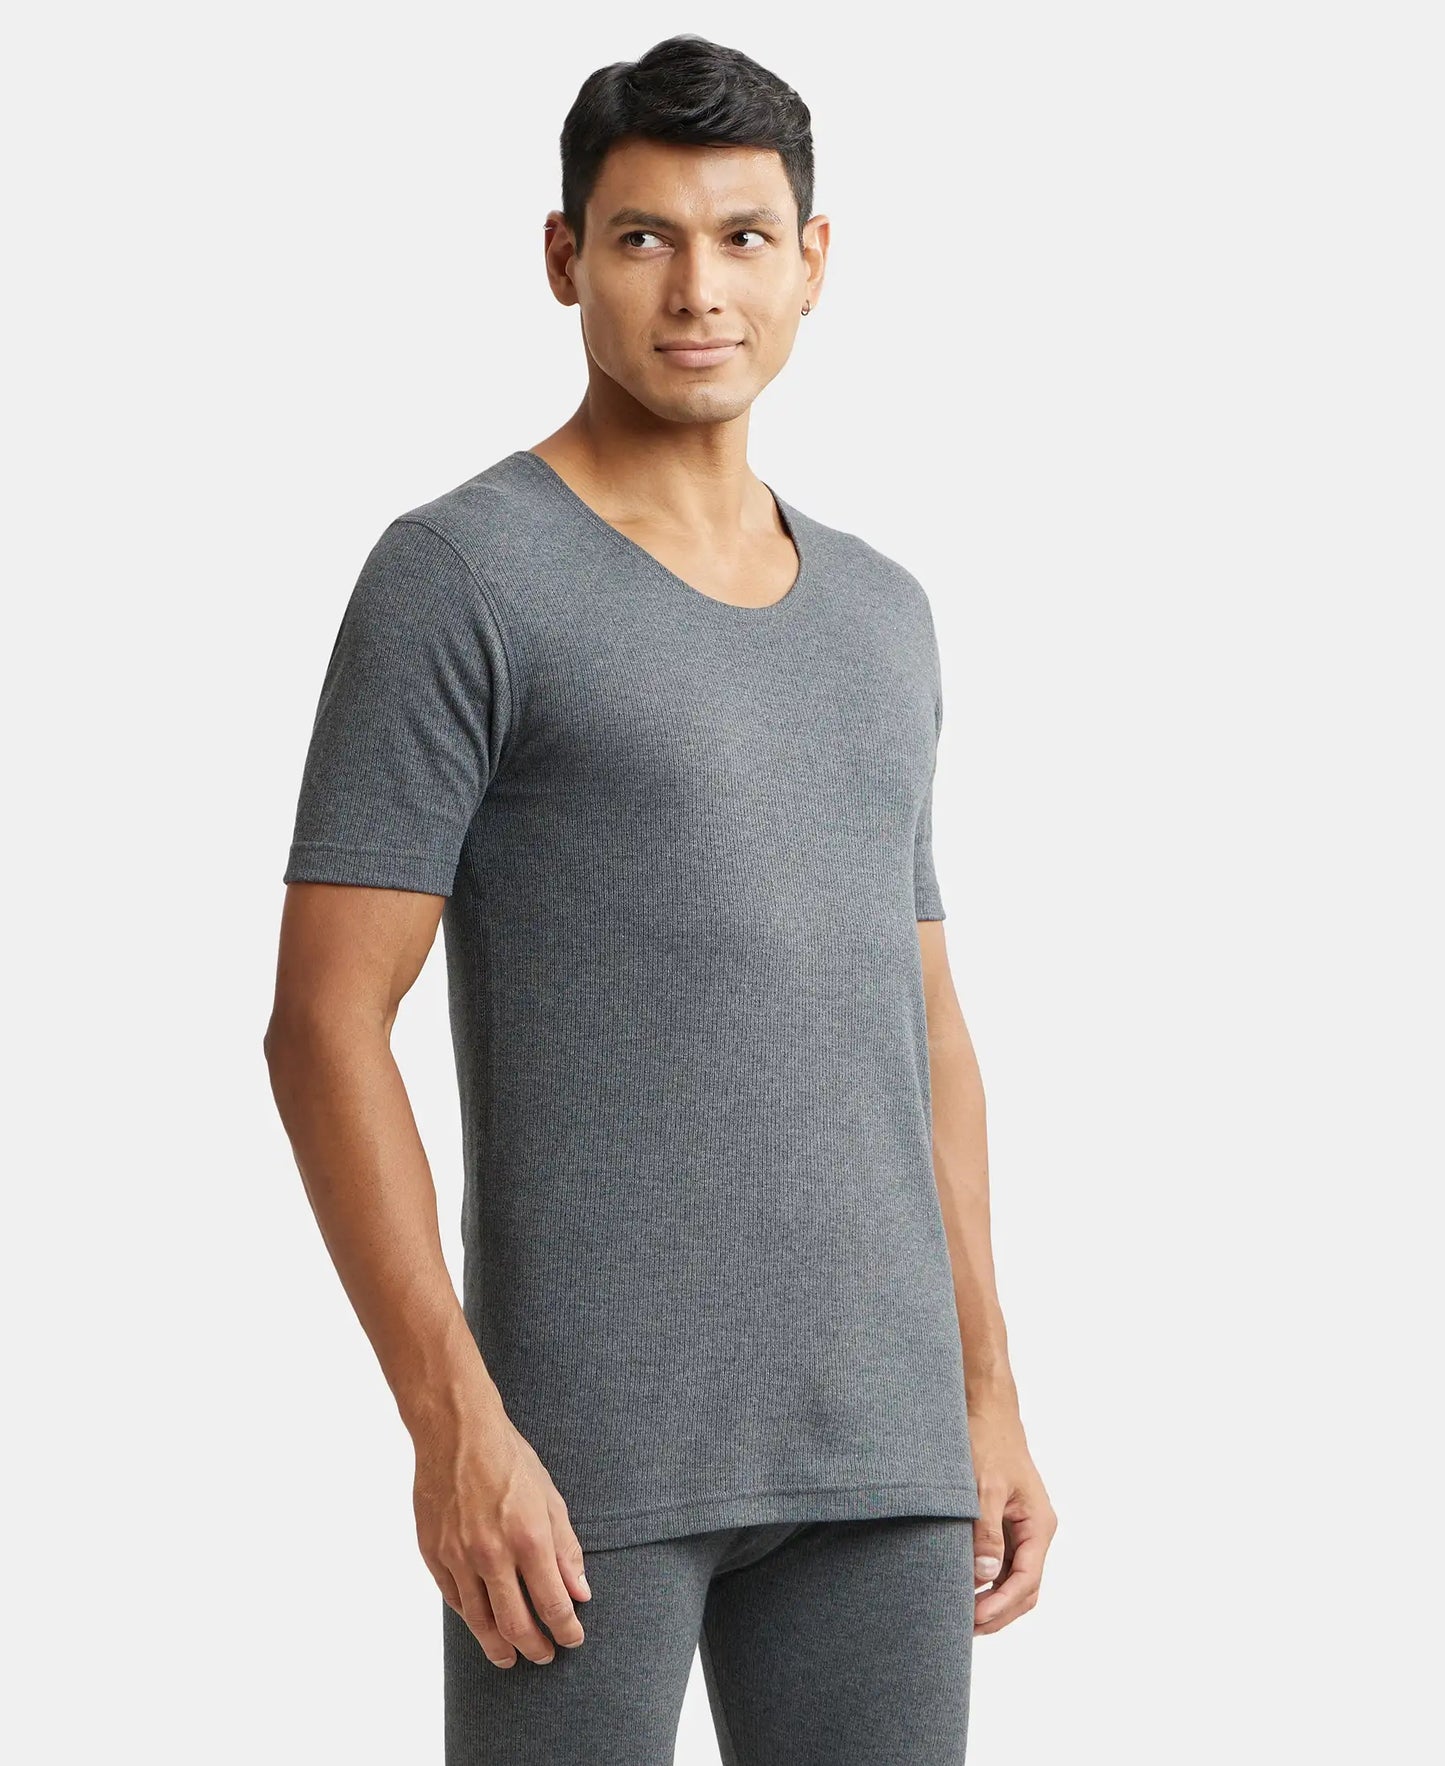 Super Combed Cotton Rich Half Sleeved Thermal Undershirt with StayWarm Technology - Charcoal Melange-2